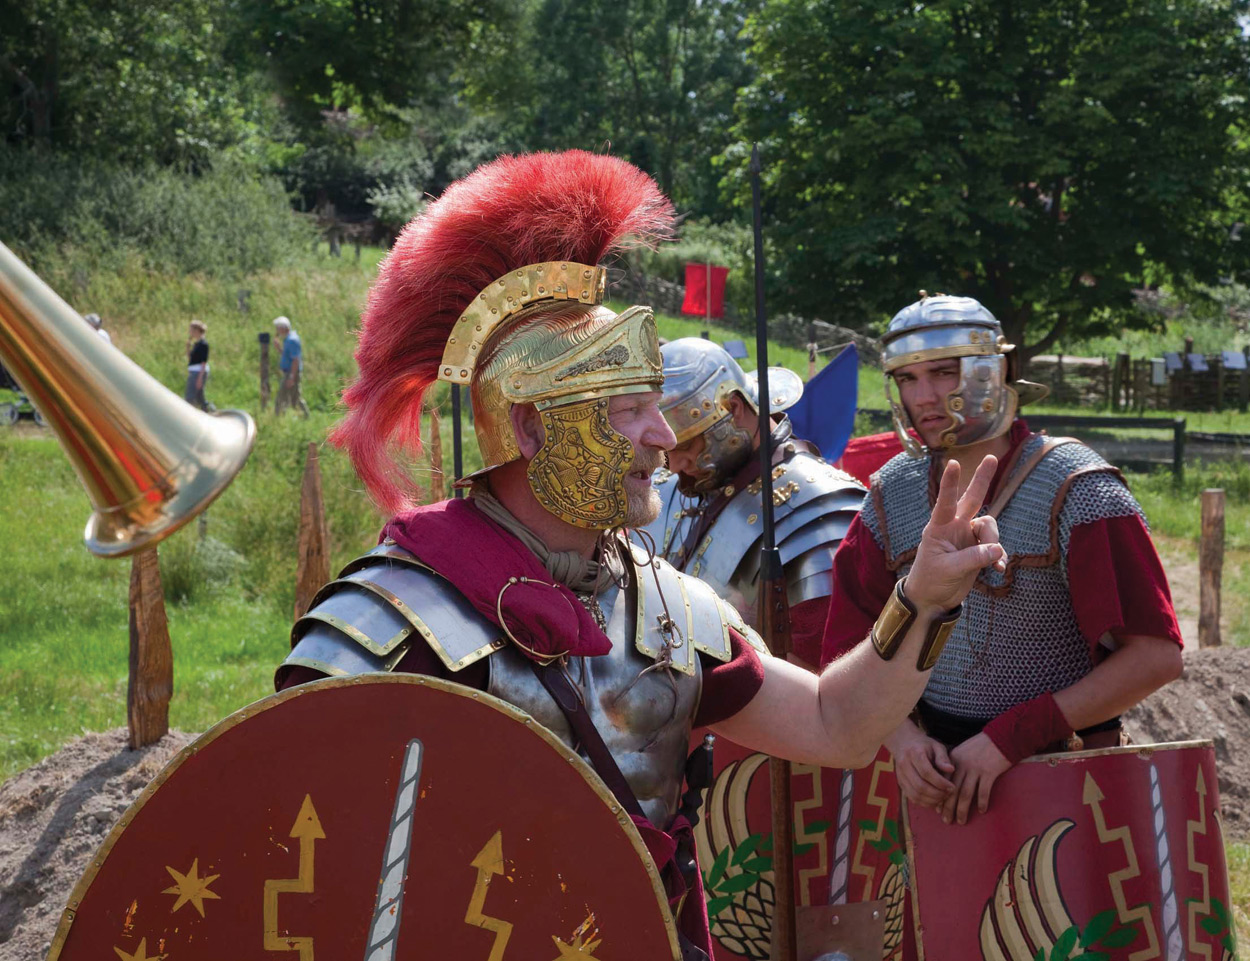 Varus and the Lost Legions in Sagnlandet Lejre - A Re-enactment Success ...